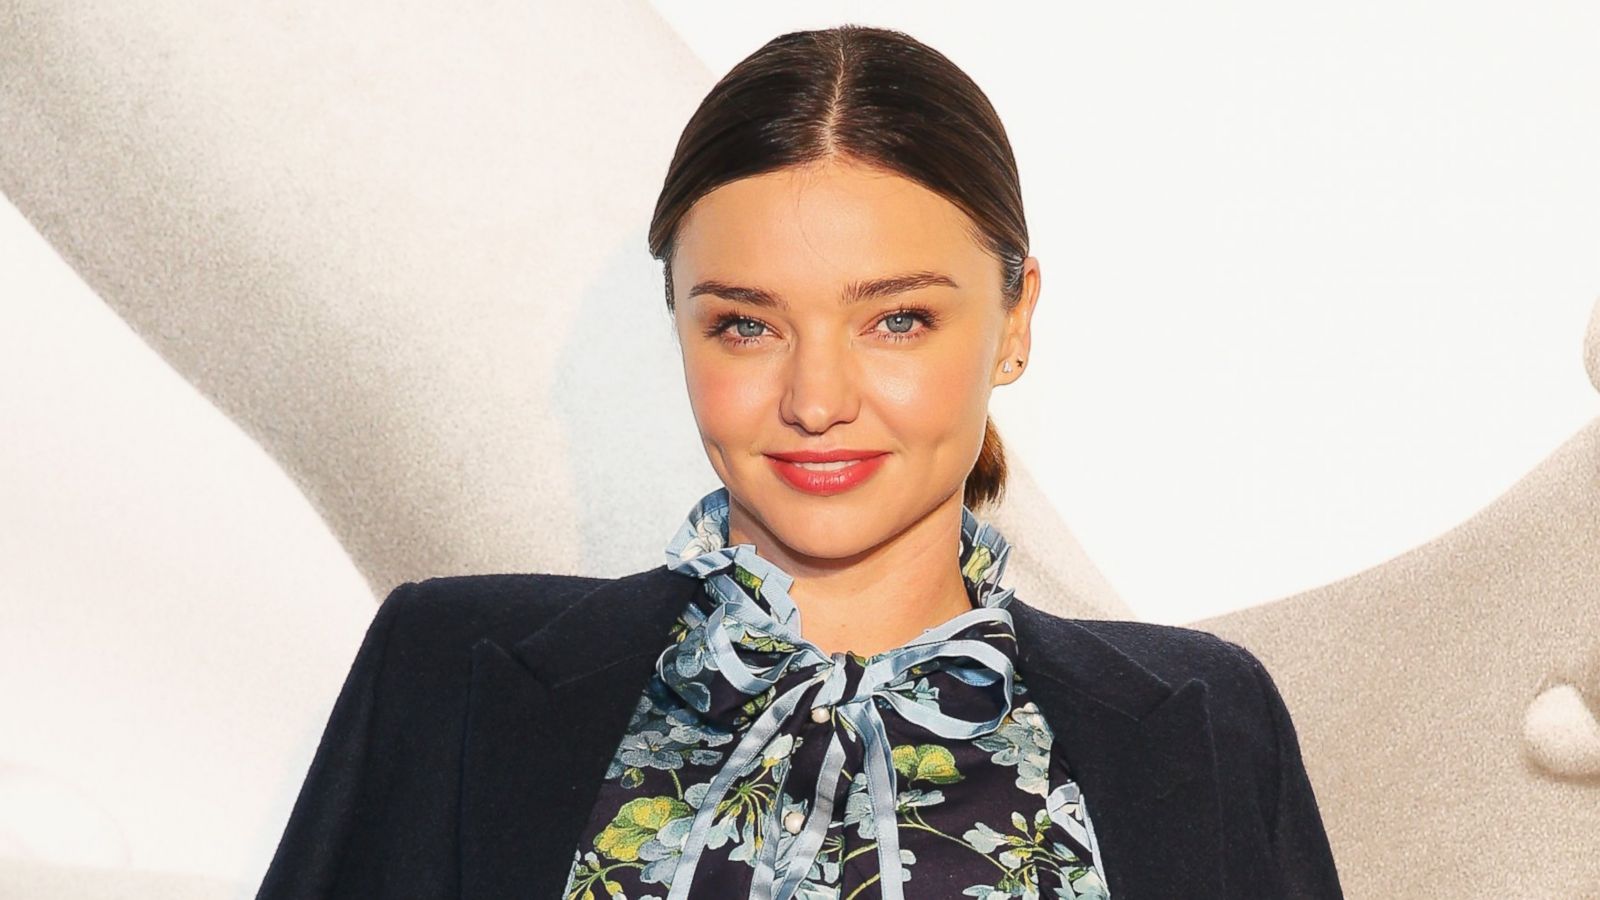 Miranda Kerr Sunk Into a Depression After Her Split From Orlando